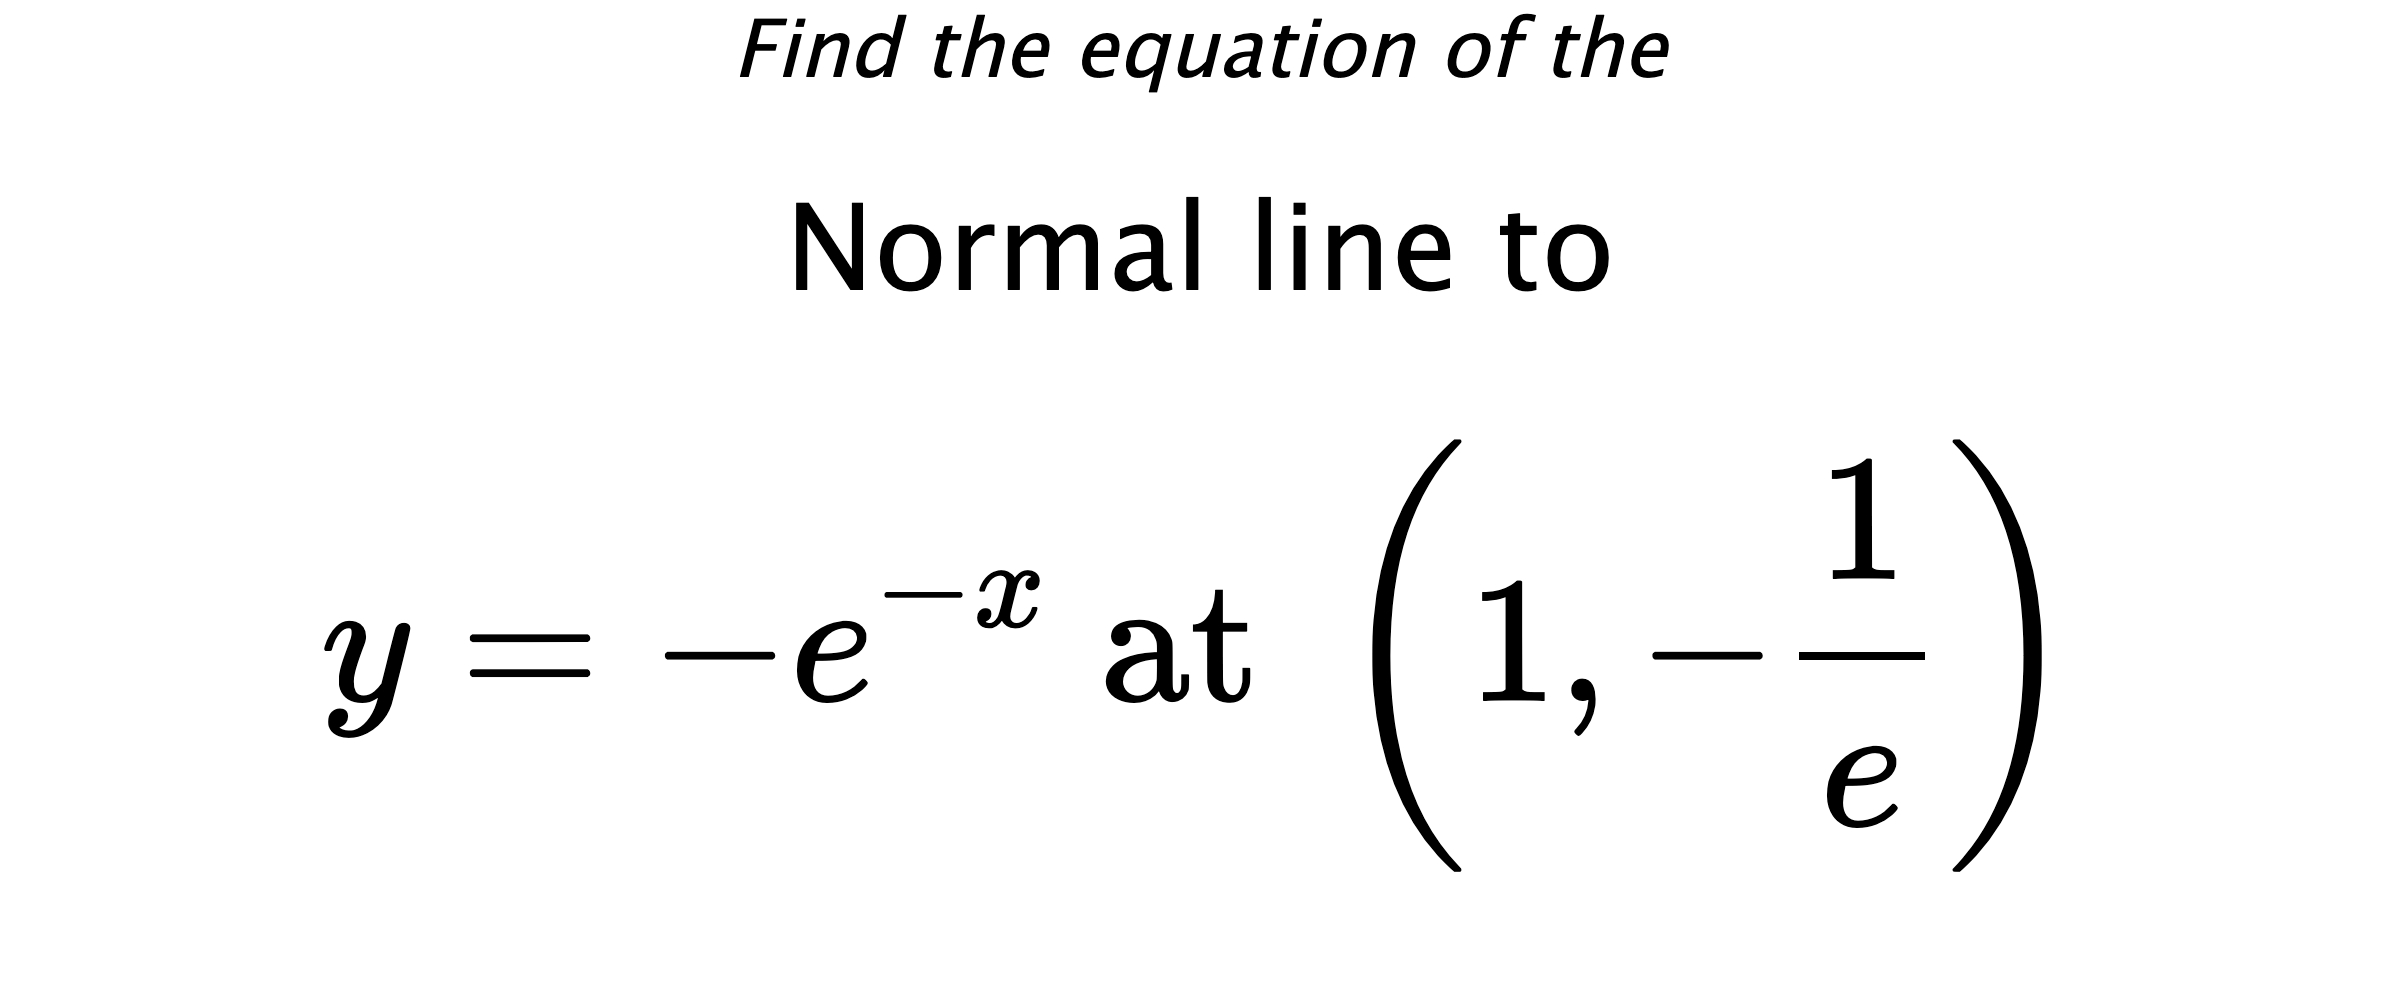 Find the equation of the Normal line to $$ y=-e^{-x} \text{ at } \left(1,-\frac{1}{e}\right) $$